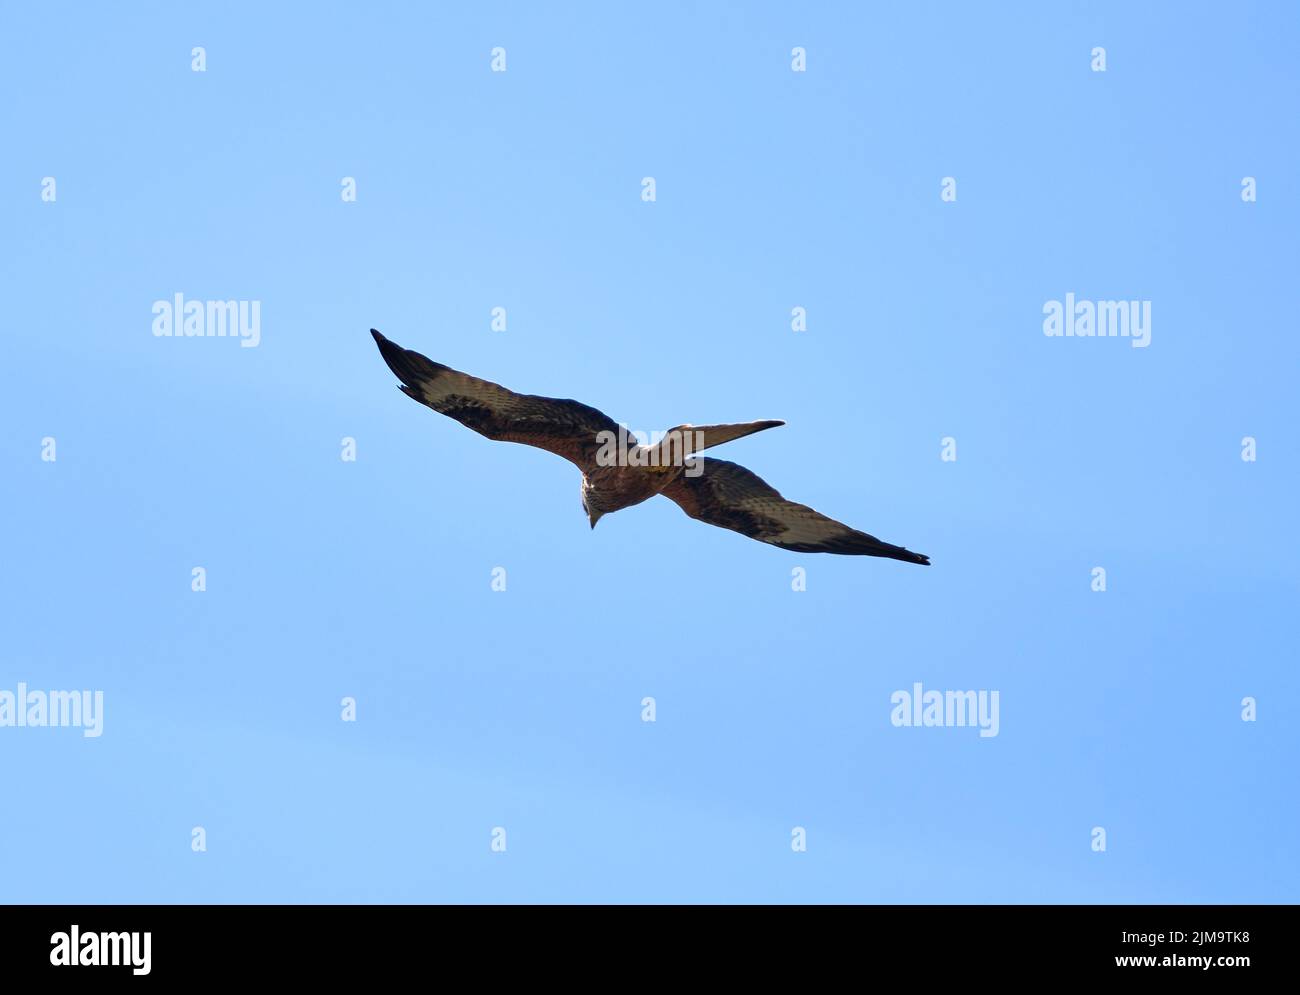 A beautiful majestic red kite bird with open wings hunting for prey under the blue sky. Stock Photo